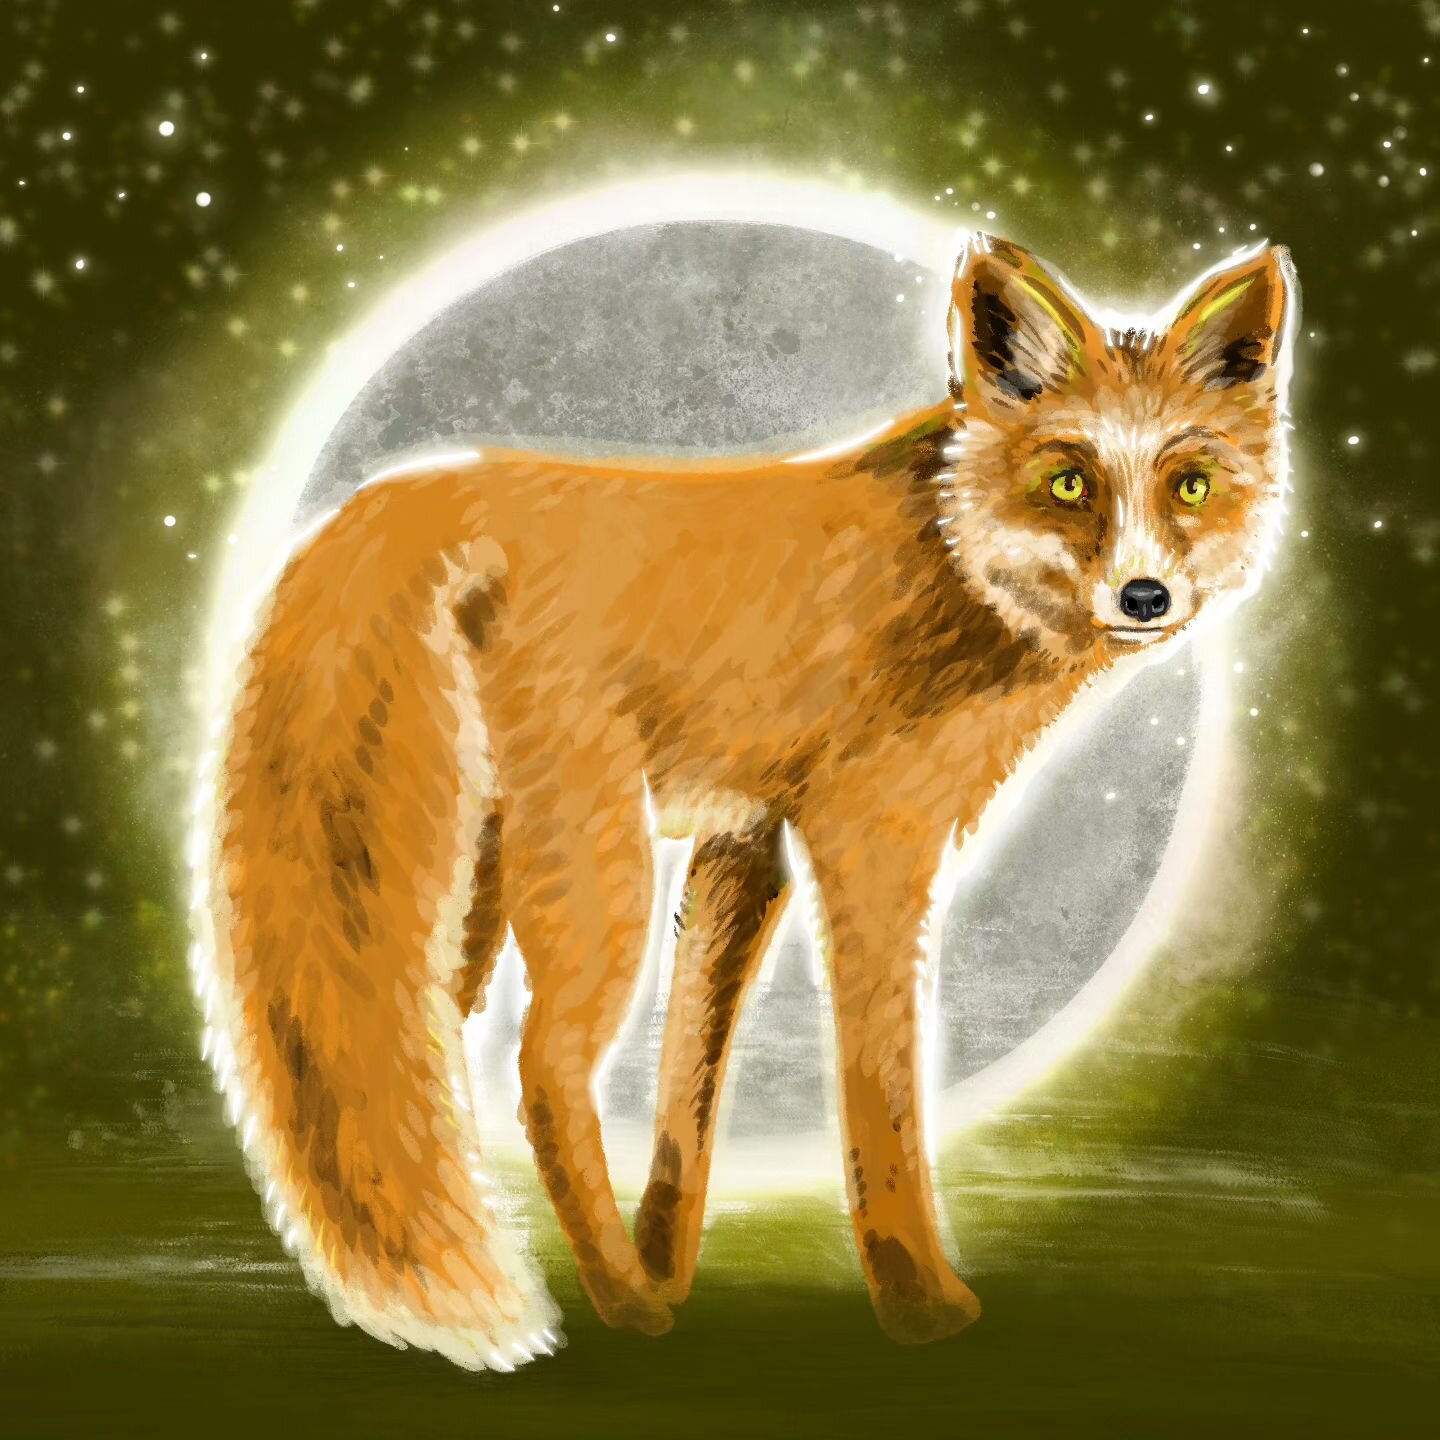 Alohactober Day 7! Today's prompt comes from my student Noah, who says to draw &quot;a fox (I love foxes).&quot; 🦊 so cute (but still a little spooky)! Thanks for the suggestion! 
.
.
.
.
.
.
.
#alohactober #alohactober23 #foxdrawing #fox #procreate